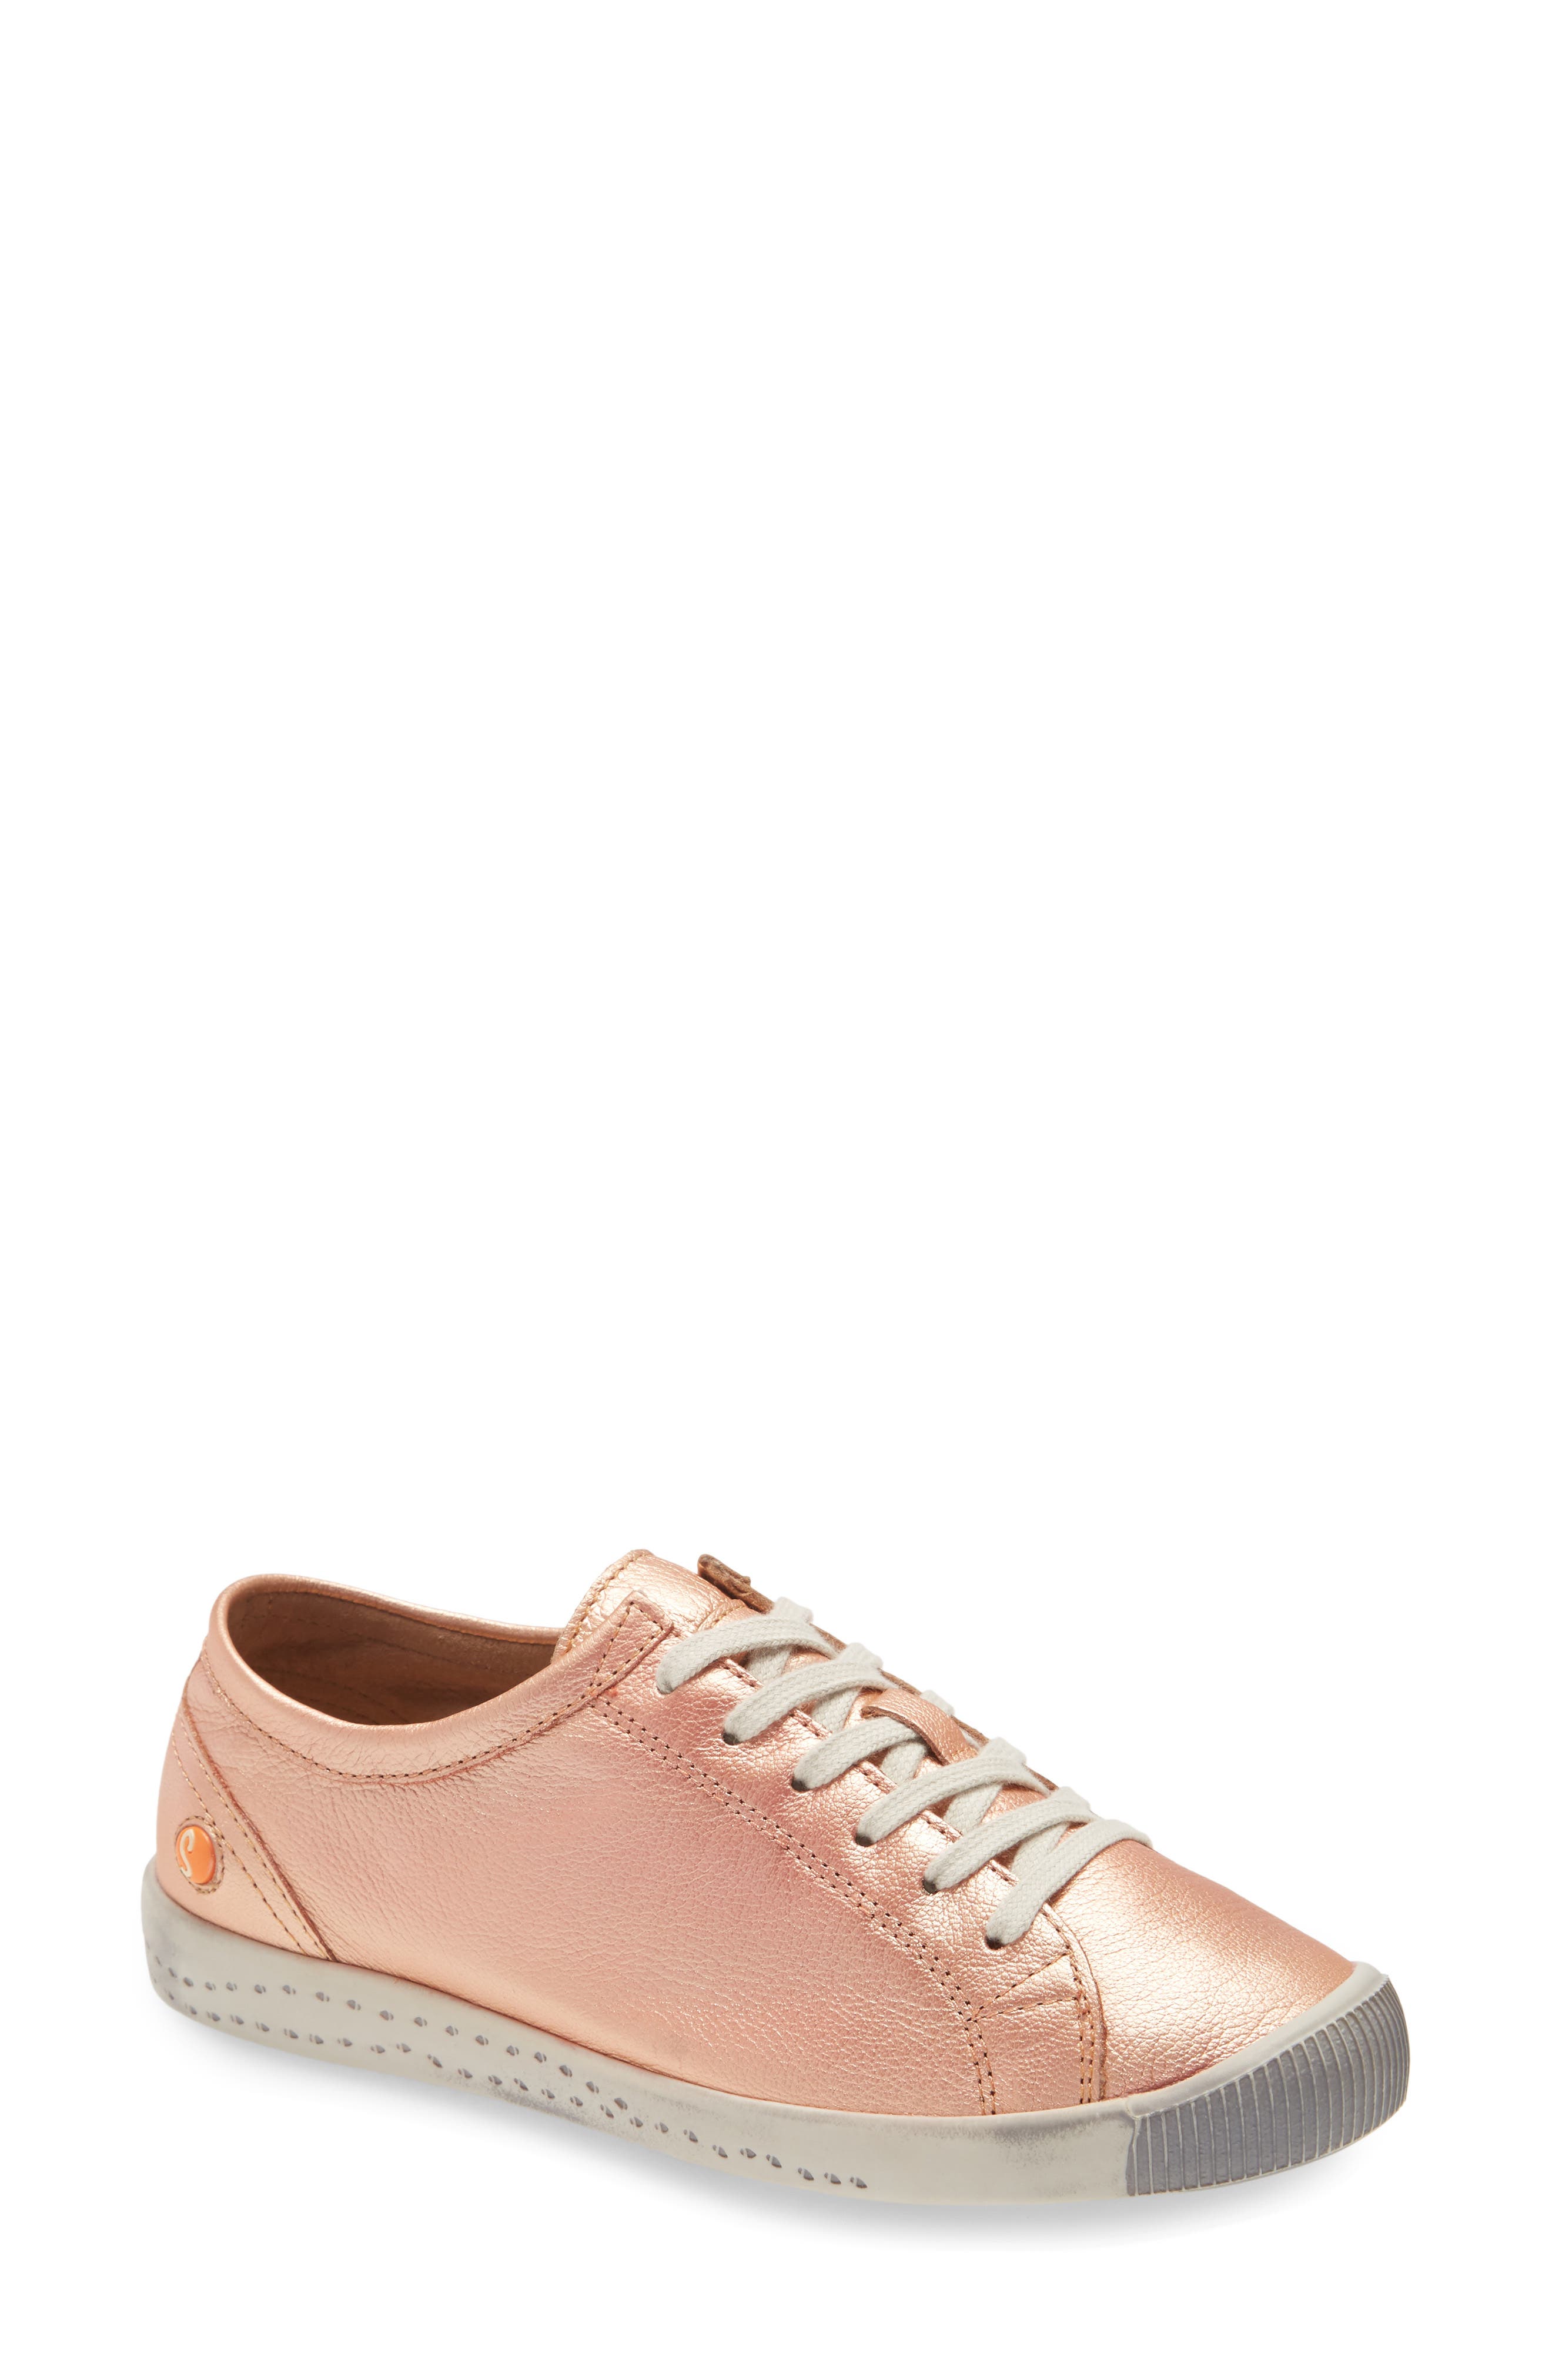 Softinos By Fly London Isla Distressed Sneaker In Blush Gold Idra Leather